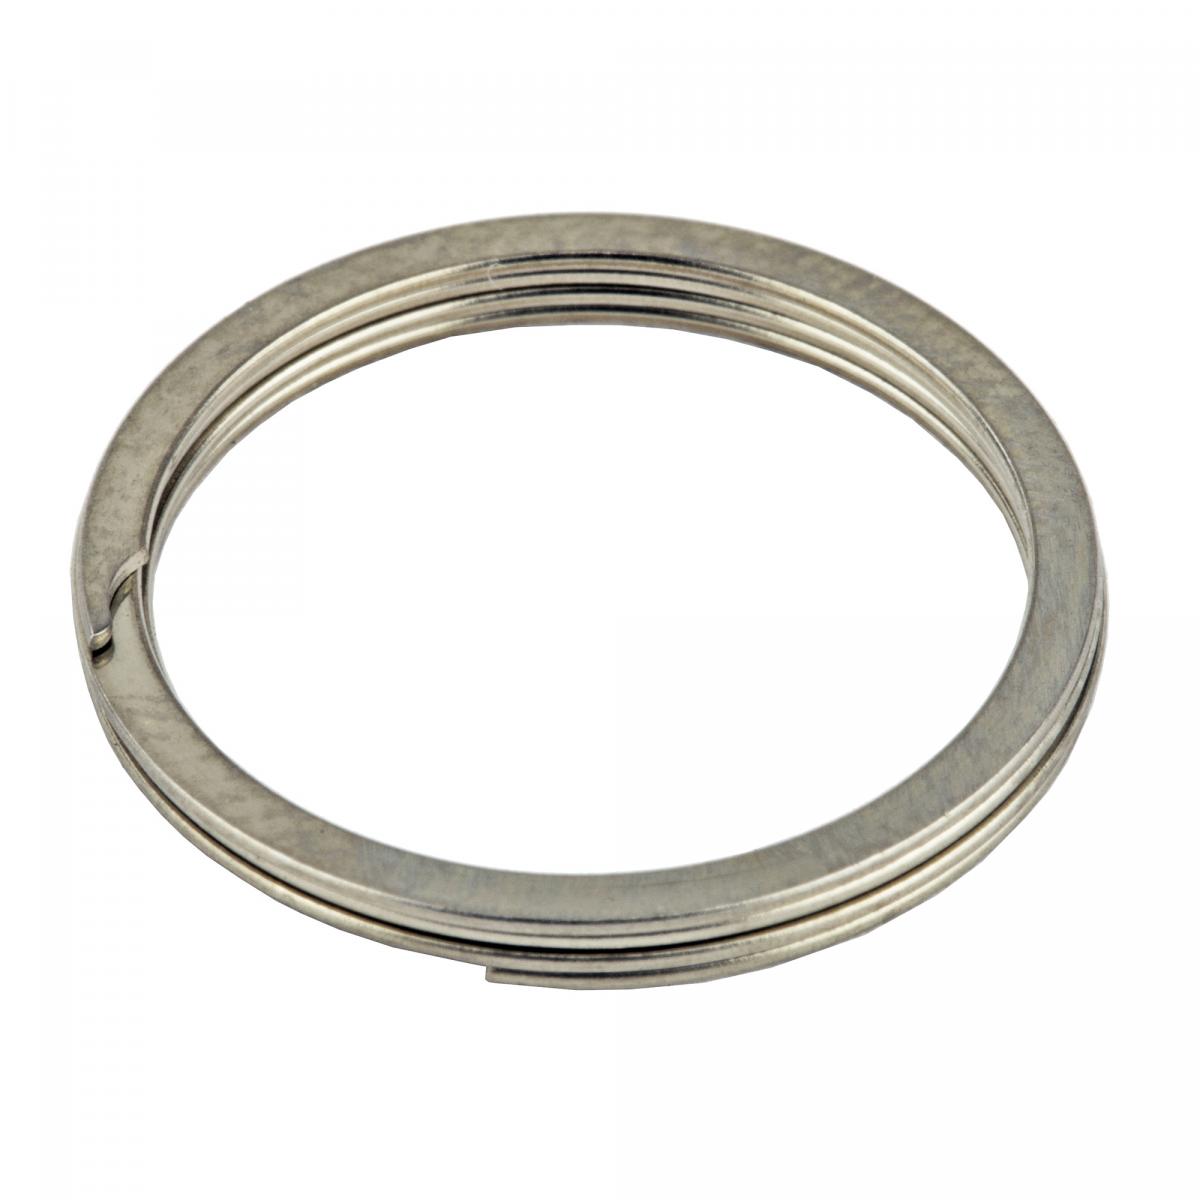 Luth-AR Helical 1 Piece Gas Ring 308 - 4Shooters